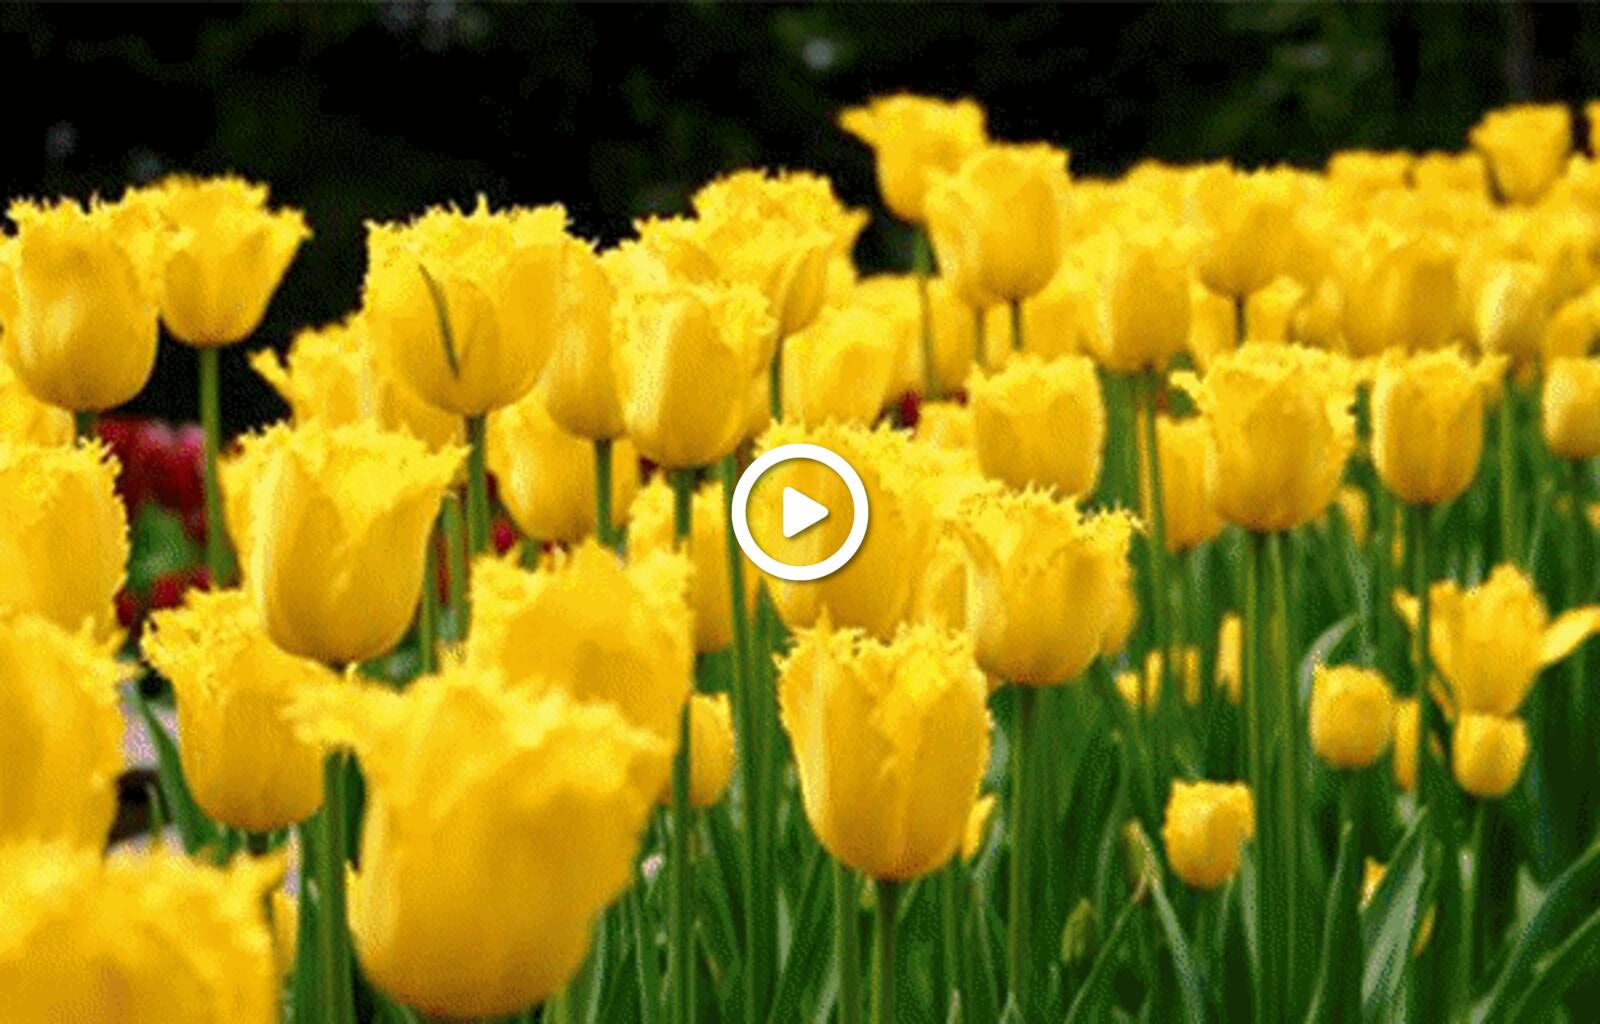 A postcard on the subject of tulips hello yellow flowers for free